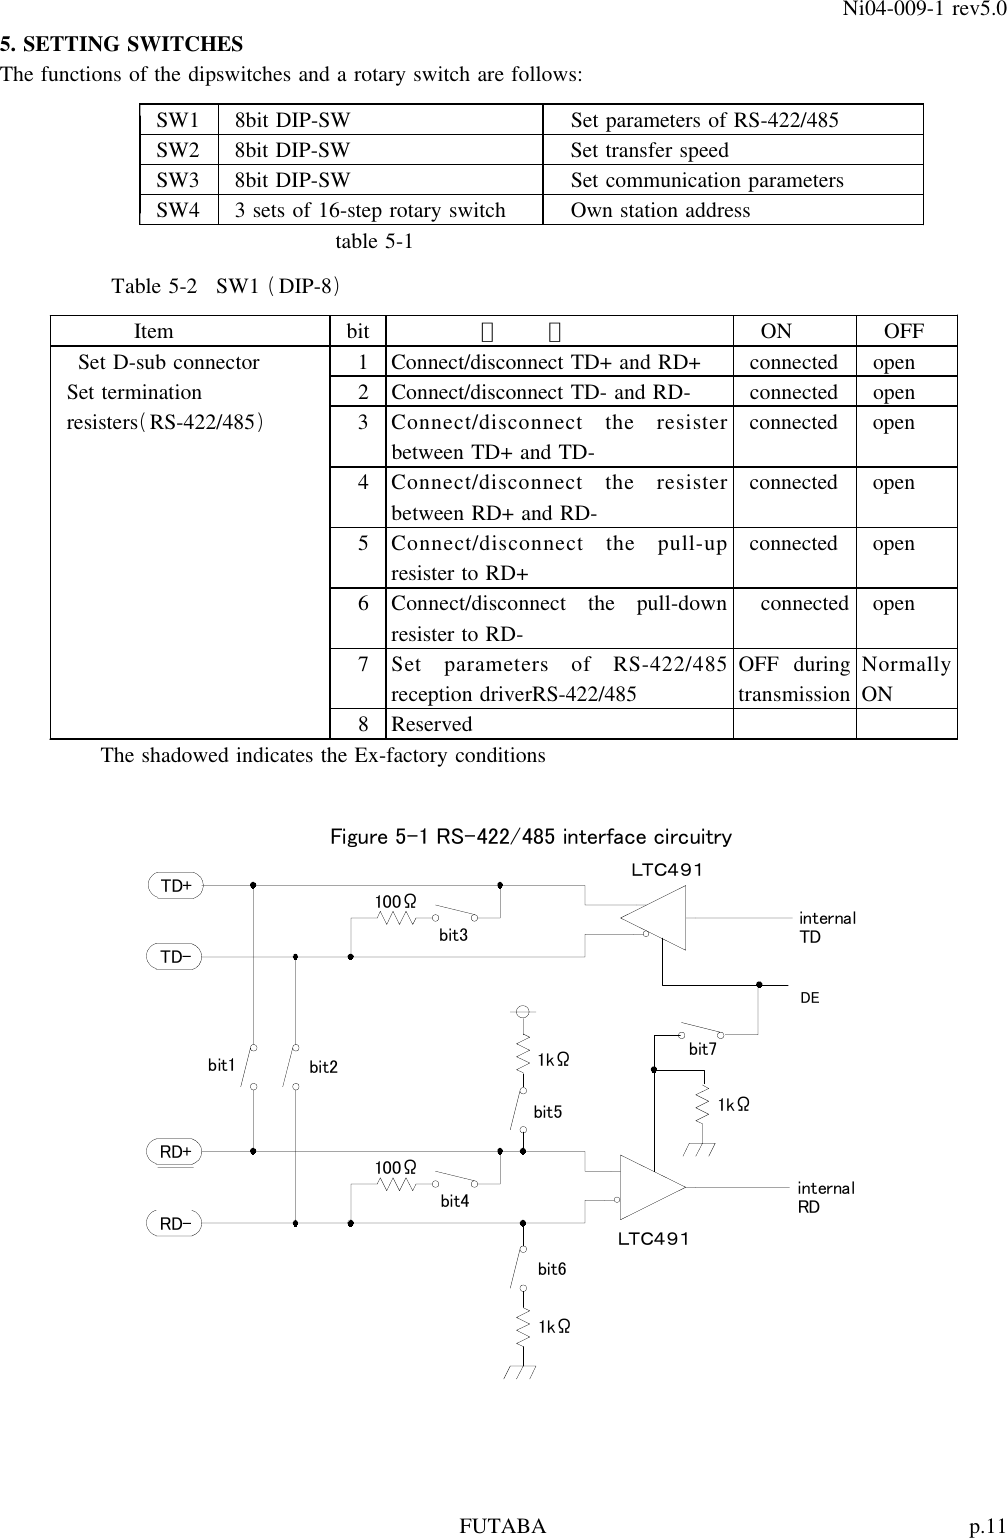 p.11FUTABANi04-009-1 rev5.05. SETTING SWITCHESThe functions of the dipswitches and a rotary switch are follows:SW1 8bit DIP-SW Set parameters of RS-422/485SW2 8bit DIP-SW Set transfer speedSW3 8bit DIP-SW Set communication parametersSW4 3 sets of 16-step rotary switch Own station addresstable 5-1Table 5-2 SW1 DIP-8()Item bit ON OFF内容Set D-sub connector 1 Connect/disconnect TD+ and RD+ connected openSet termination 2 Connect/disconnect TD- and RD- connected openresisters RS-422/485 3 Connect/disconnect the resister connected open()between TD+ and TD-4 Connect/disconnect the resister connected openbetweenRD+andRD-5 Connect/disconnect the pull-up connected openresister to RD+6 Connect/disconnect the pull-down connected openresister to RD-7 Set parameters of RS-422/485 OFF during Normallyreception driverRS-422/485 transmission ON8 ReservedThe shadowed indicates the Ex-factory conditionsinternalTDinternalRDTD+TD-RD+RD-Figure 5-1 RS-422/485 interface circuitryＬＴＣ４９１ＬＴＣ４９１100Ω100Ω1kΩ1kΩbit1 bit2bit3bit4bit5bit6DE1kΩbit7